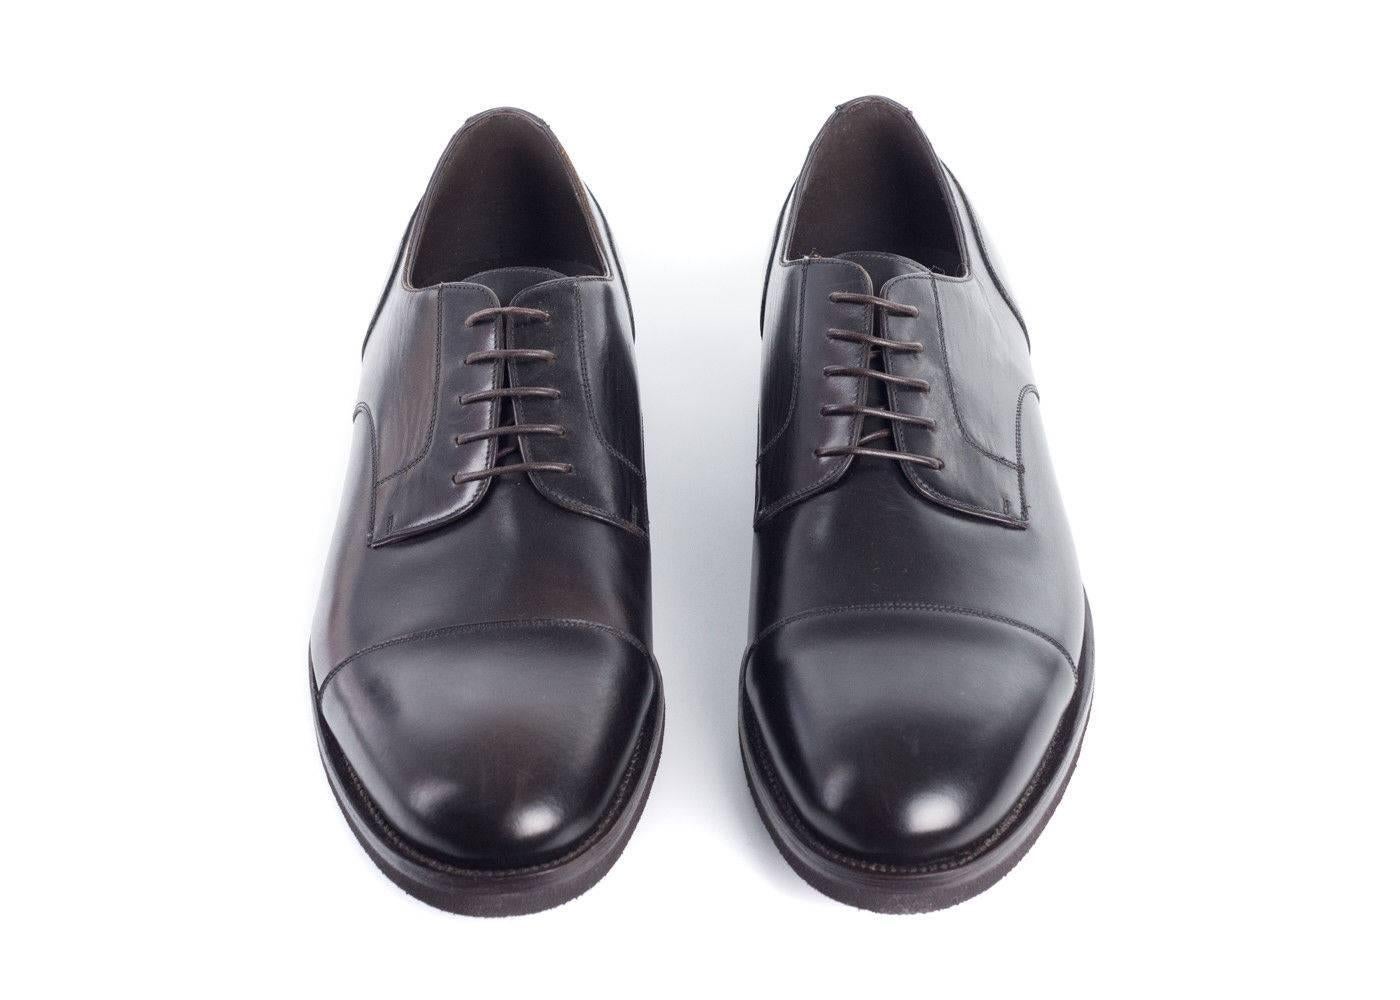 rand New in Original Box with Dust Bag
Retails in Stores and Online for $1150
Size EU 44/ US 11 Fits True to Size

This Brunello Cucinelli leather derby shoe made of the smoothest leather material delivers the epitome of Italian craftsmanship .